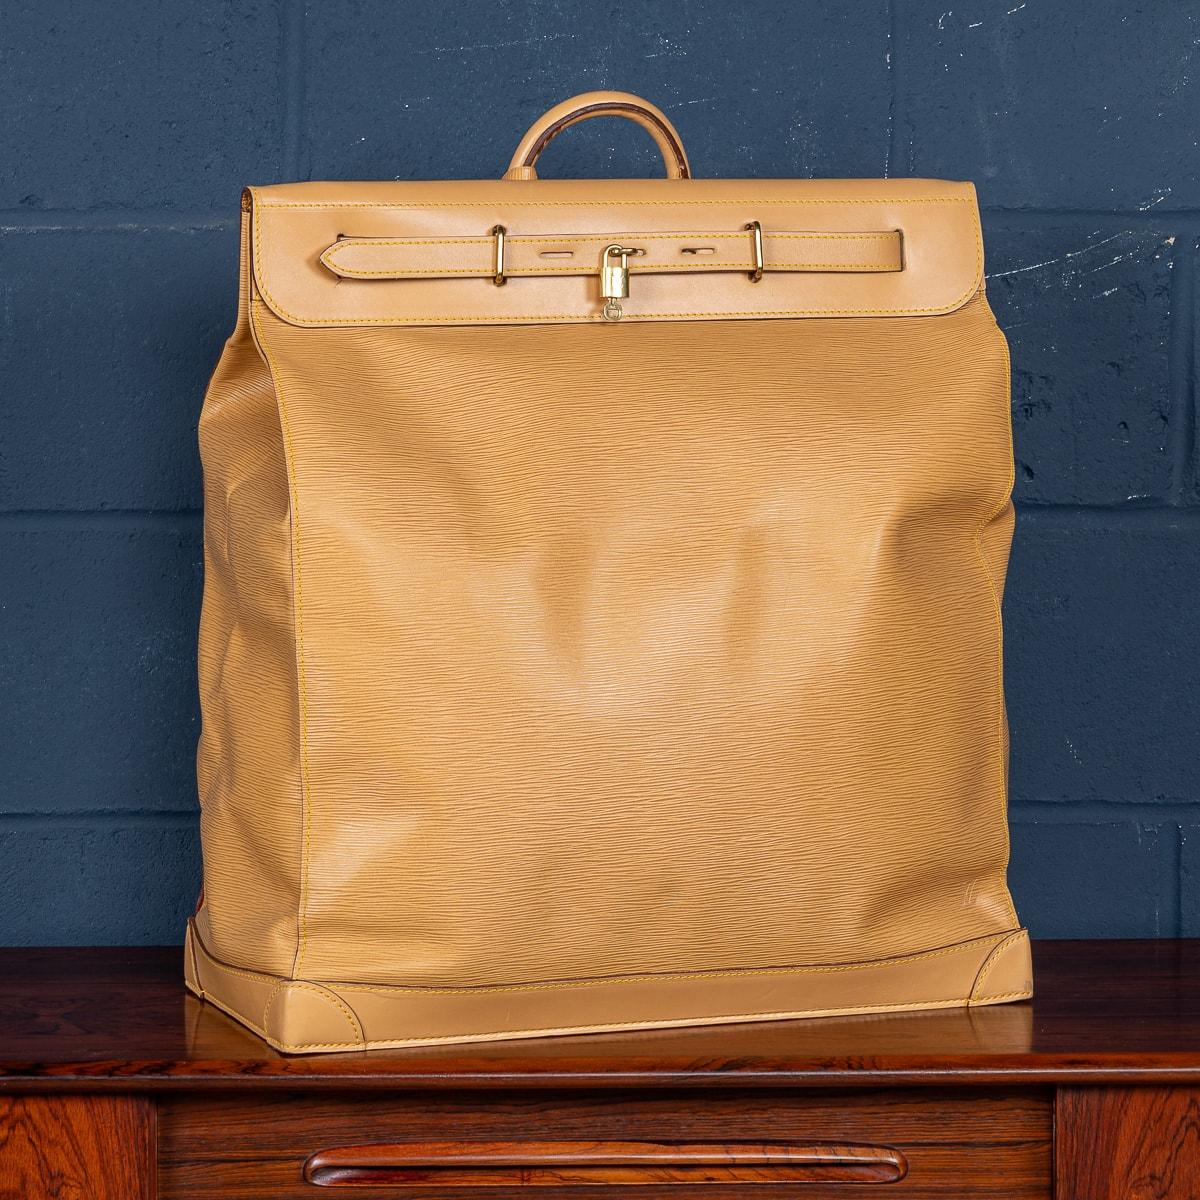 A large Louis Vuitton steamer travel bag in Epi leather, made in France in the latter quarter of the 20th century. Steamer bags have been produced by Louis Vuitton for over 120 years. In 1901, the company introduced the simple canvas and leather